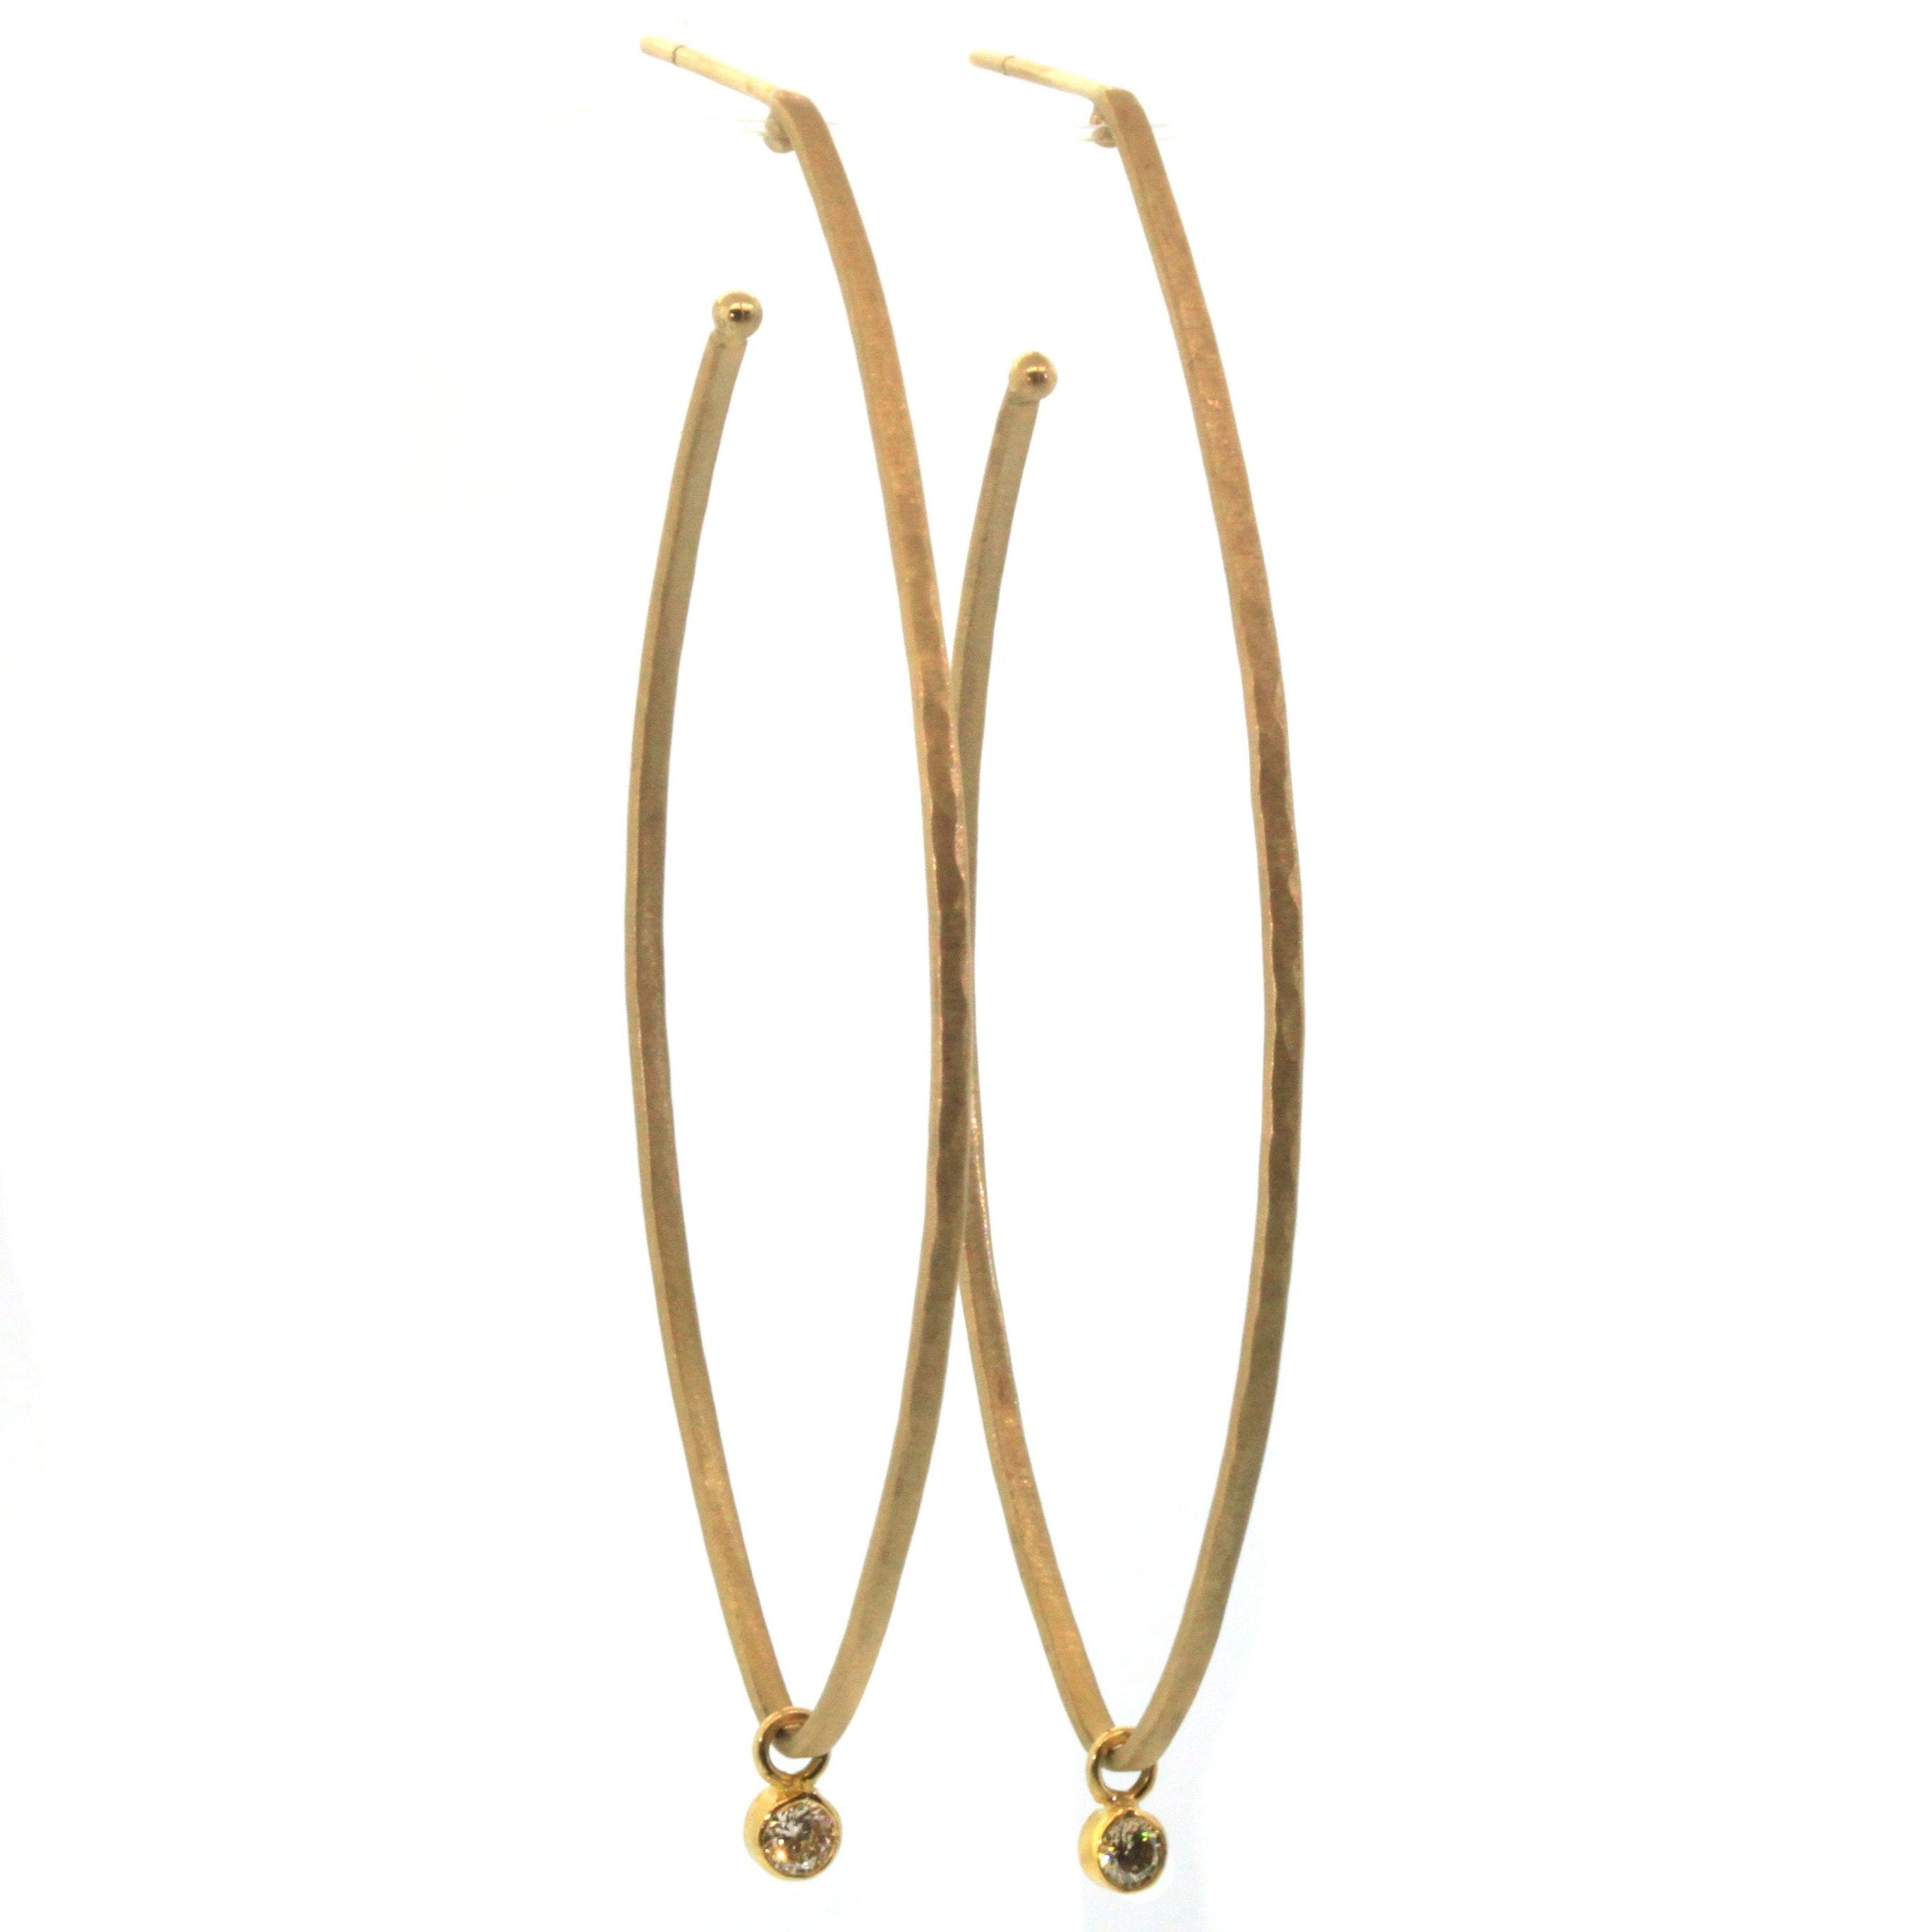 These Elongated Diamond Dangle Hoops from Rebecca Lankford Designs are fit for a queen. Each hoop features a glistening white diamond bezel set and dangling from a textured, yellow gold oval hoop.